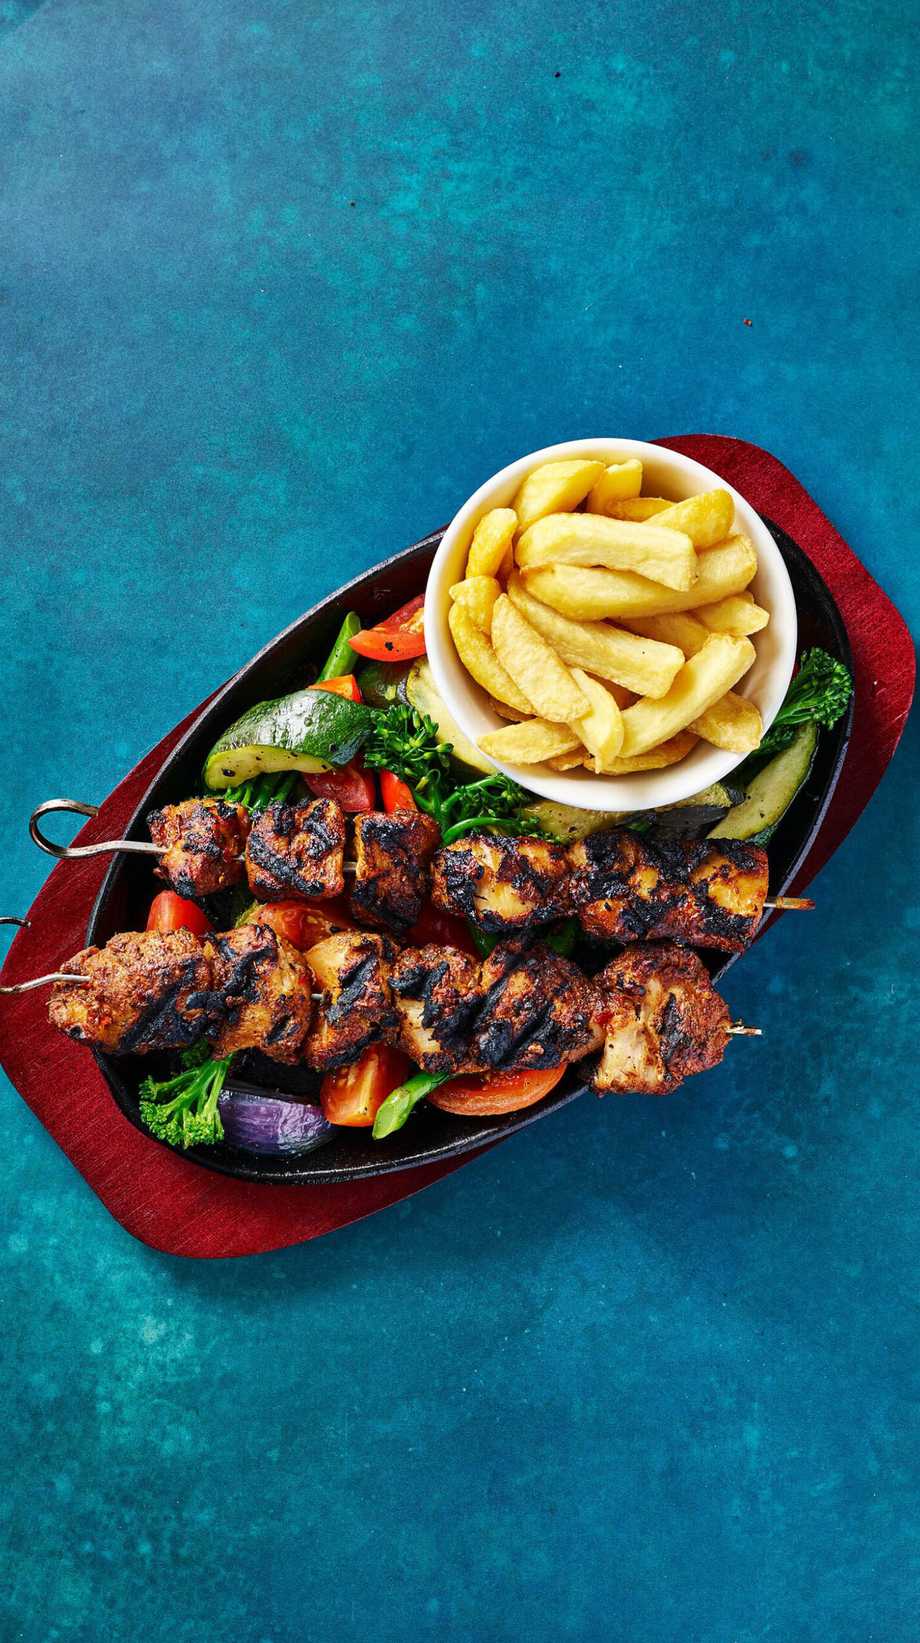 A bird's eye view of a jerk chicken skewer skillet, complete with chips and grilled vegetables.